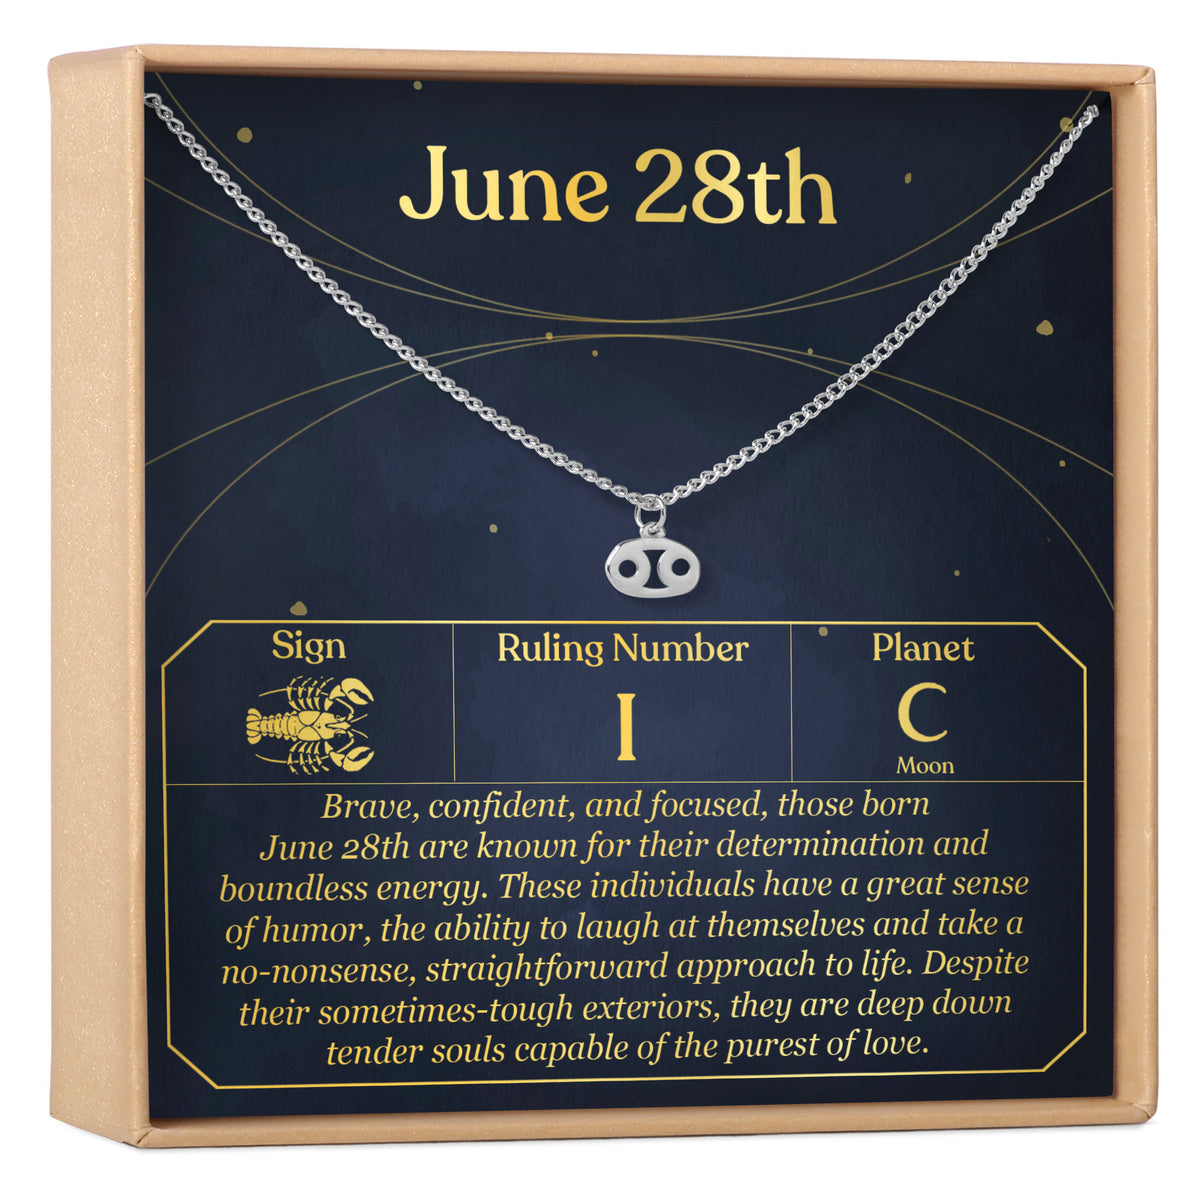 June 28th Cancer Necklace